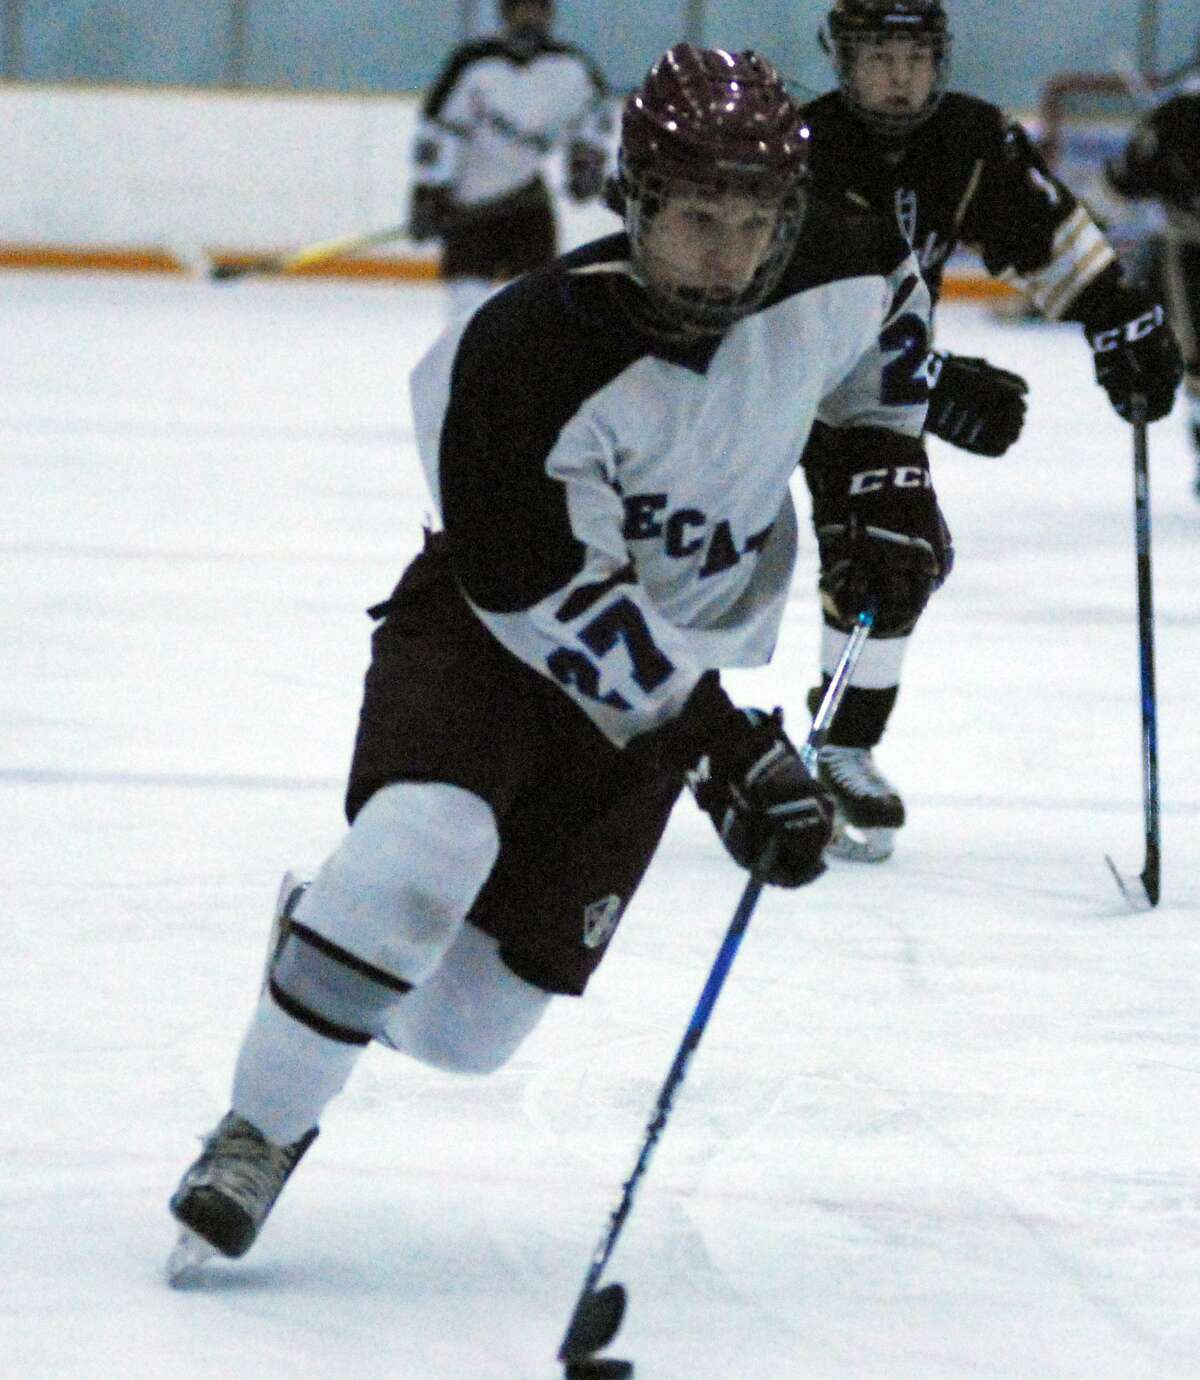 BBD sophomore Tyler Caldara skates with the puck during a game against Barlow on Wednesday.